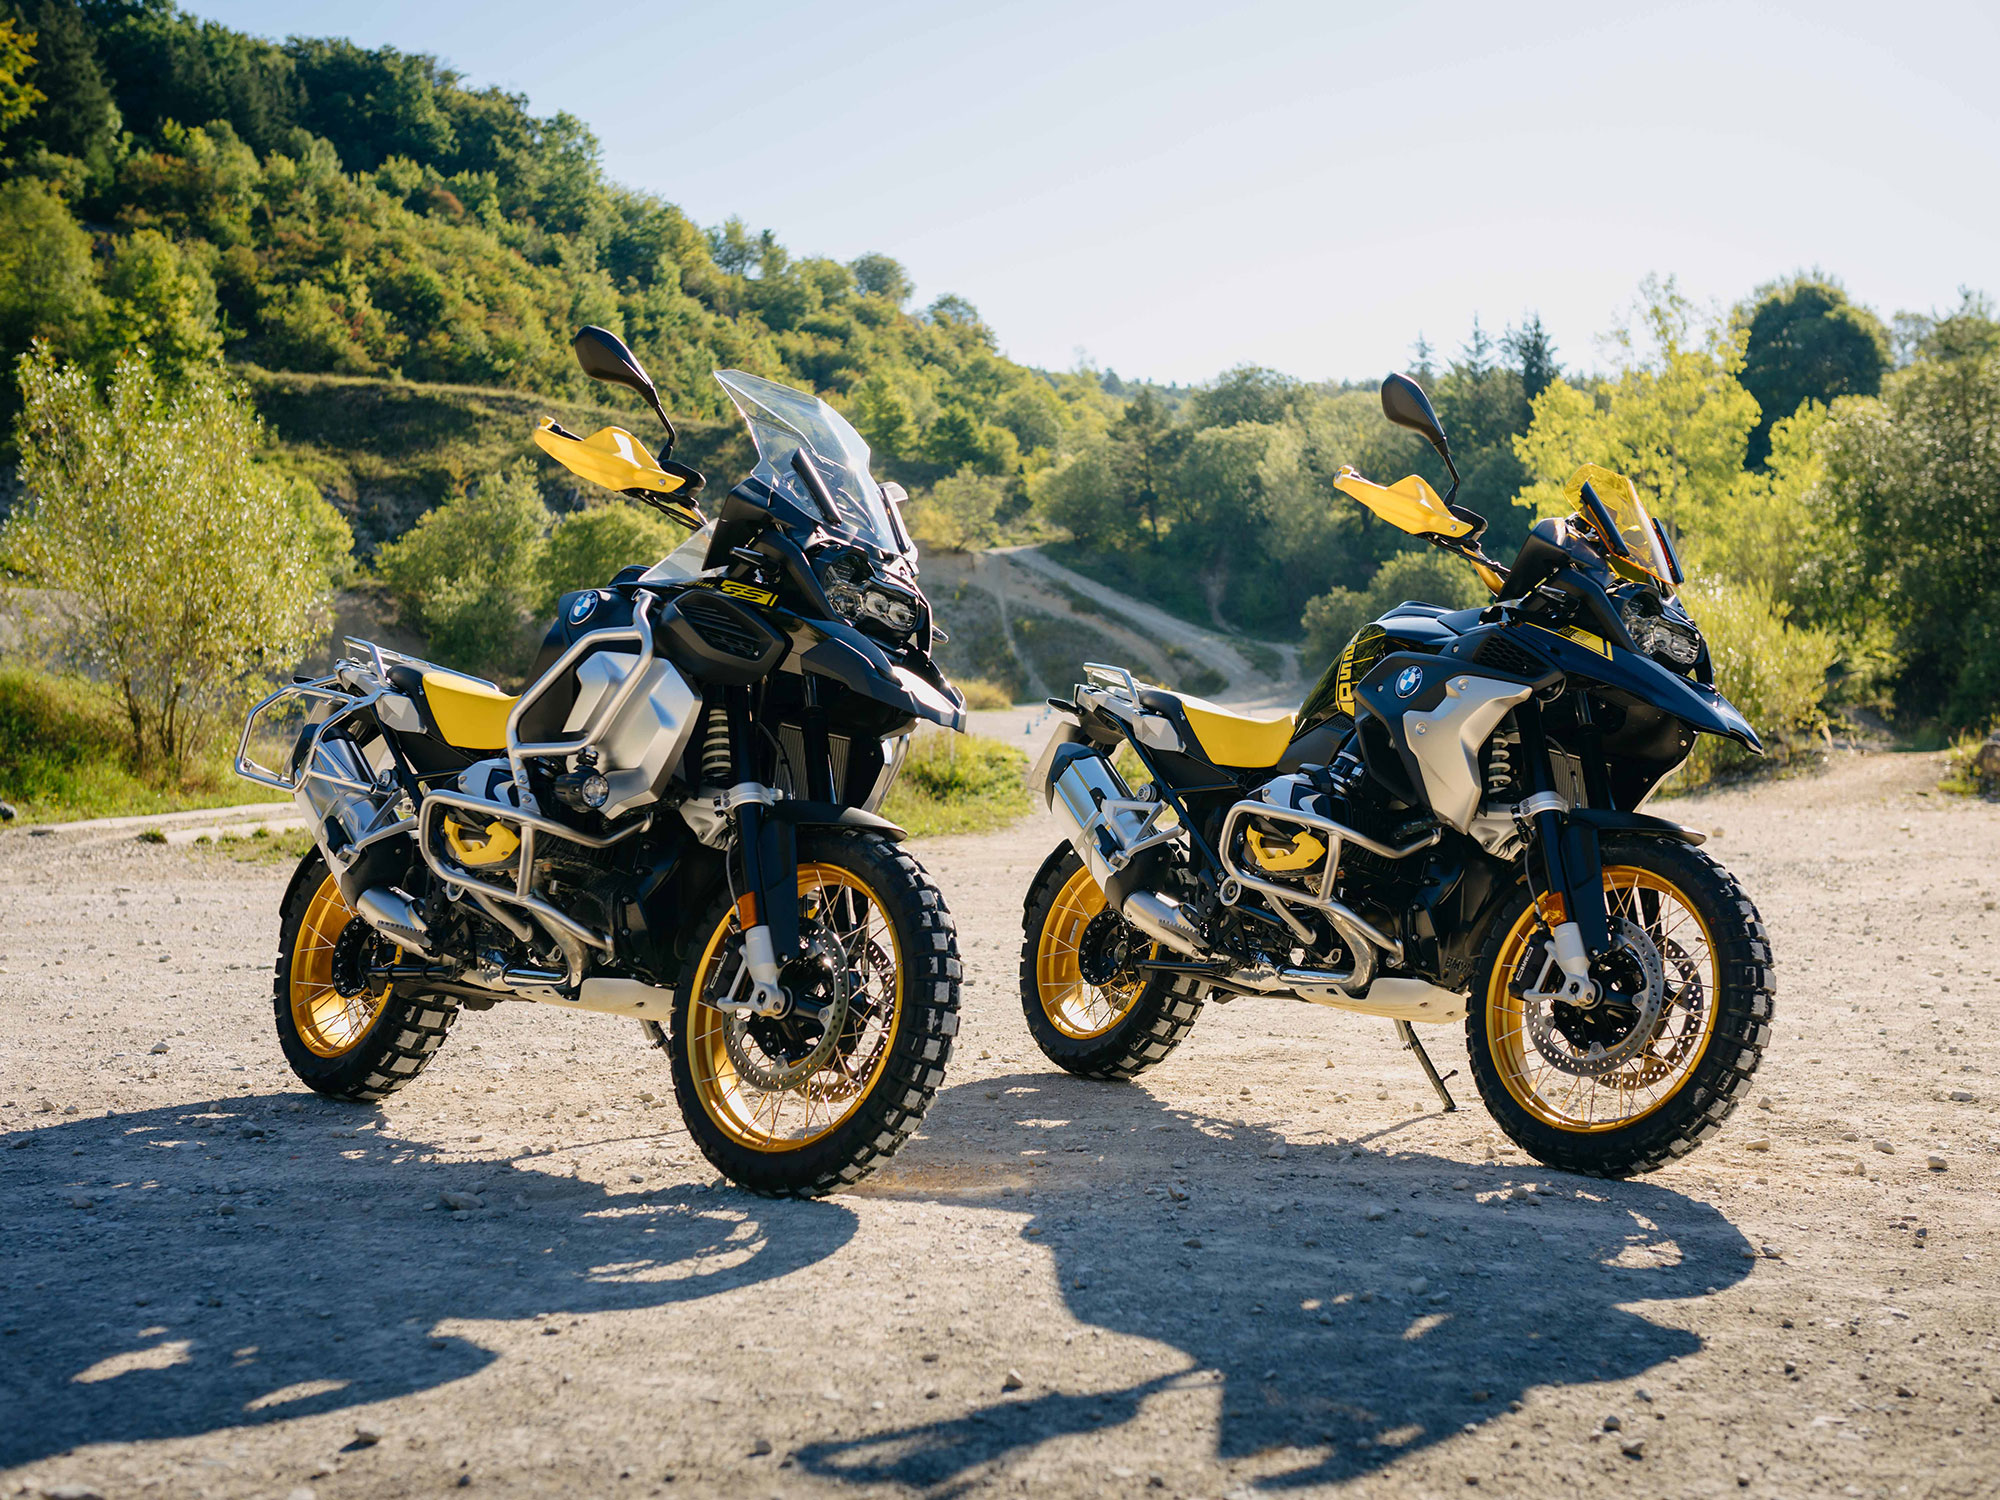 2021 BMW R 1250 GS And R 1250 GS Adventure First Look